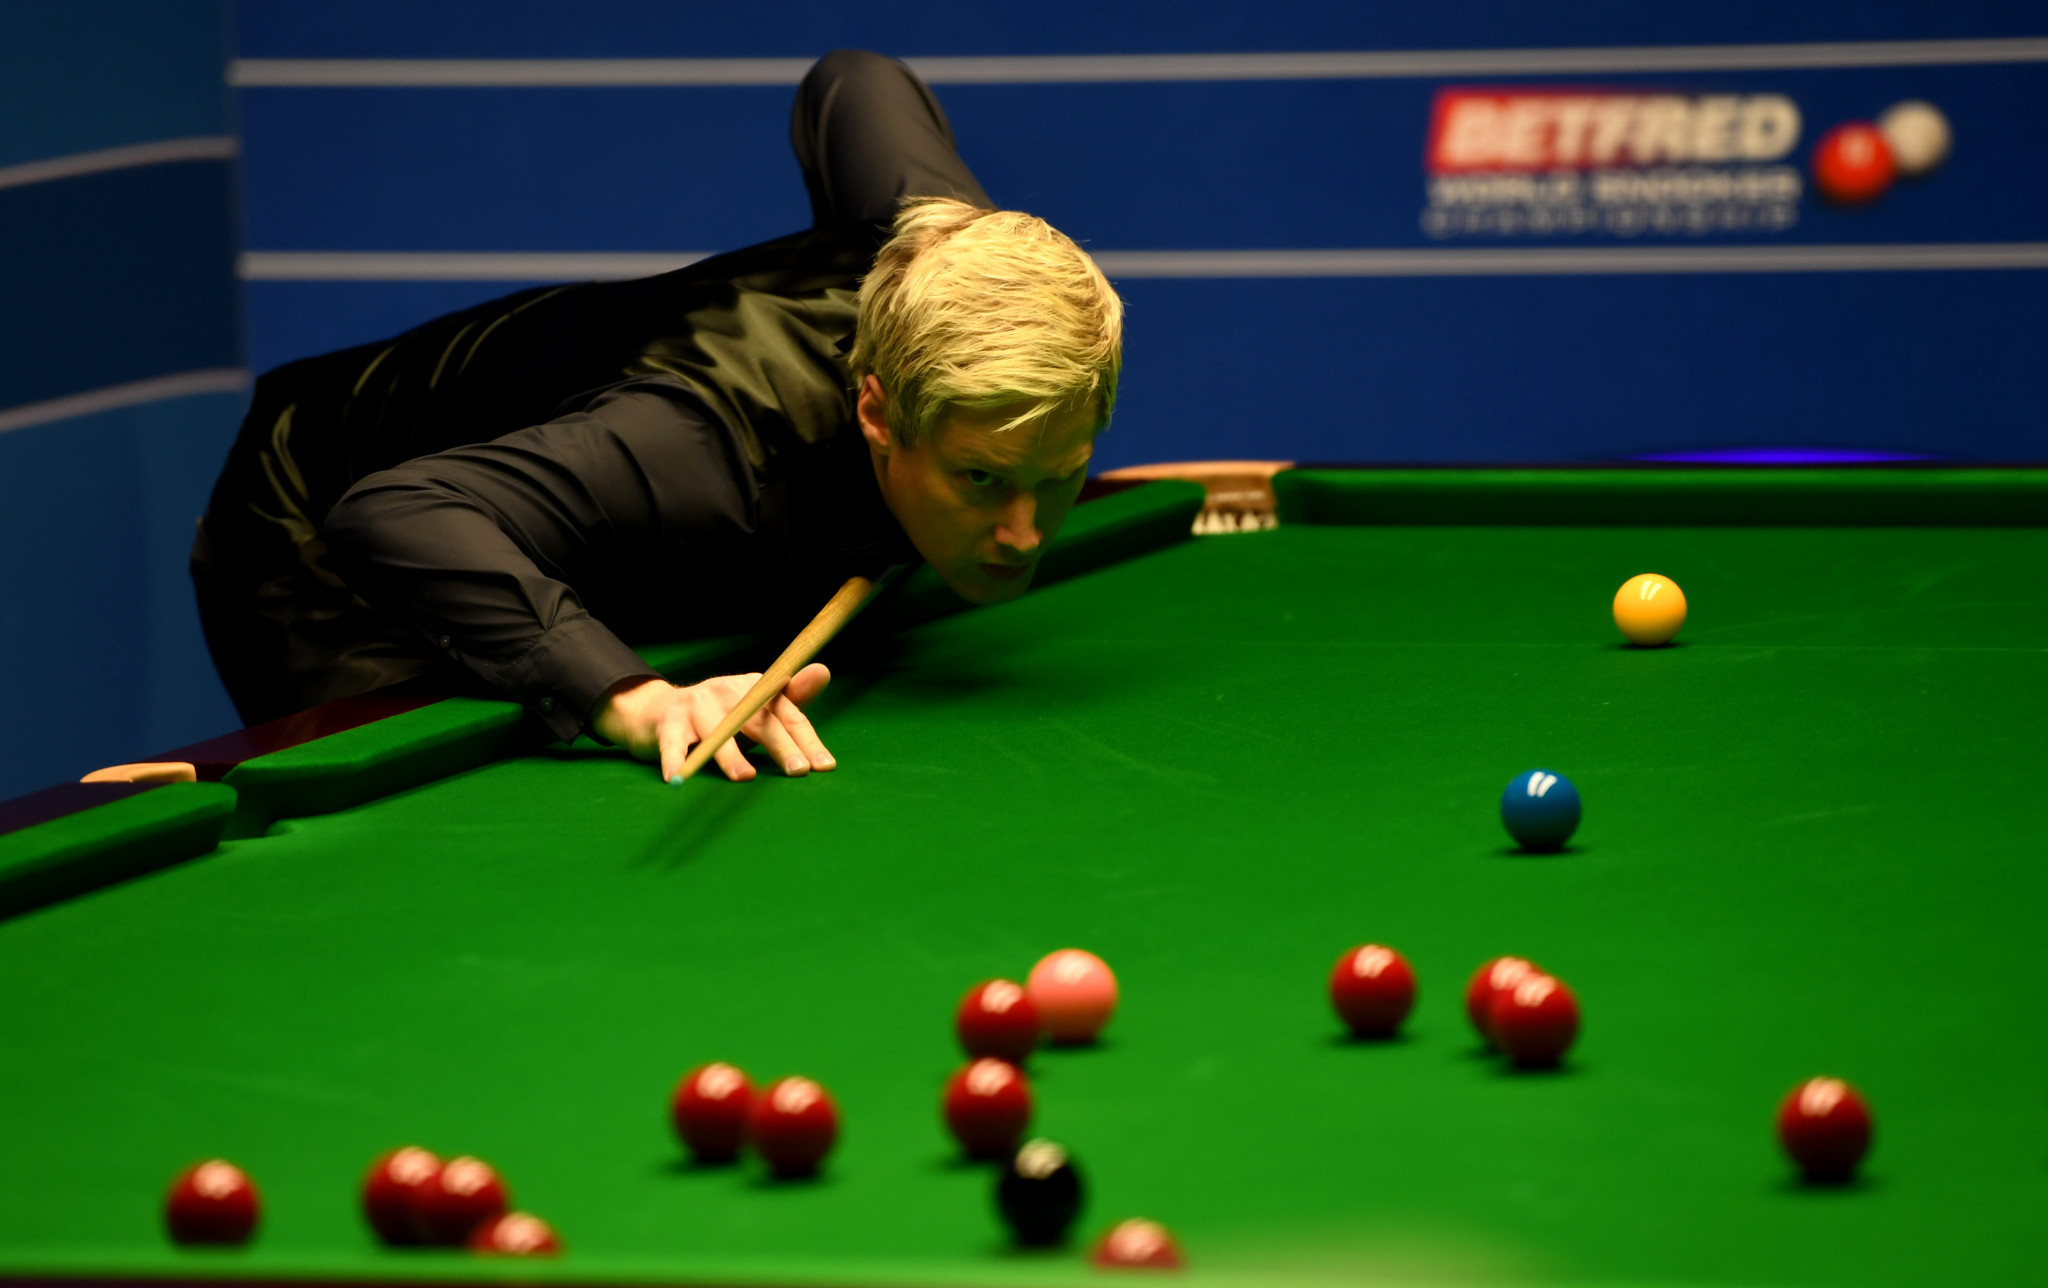 Australia's Neil Robertson, the second seed, reached the second round of the World Snooker Championship today with a win over Liang Wenbo ©Getty Images